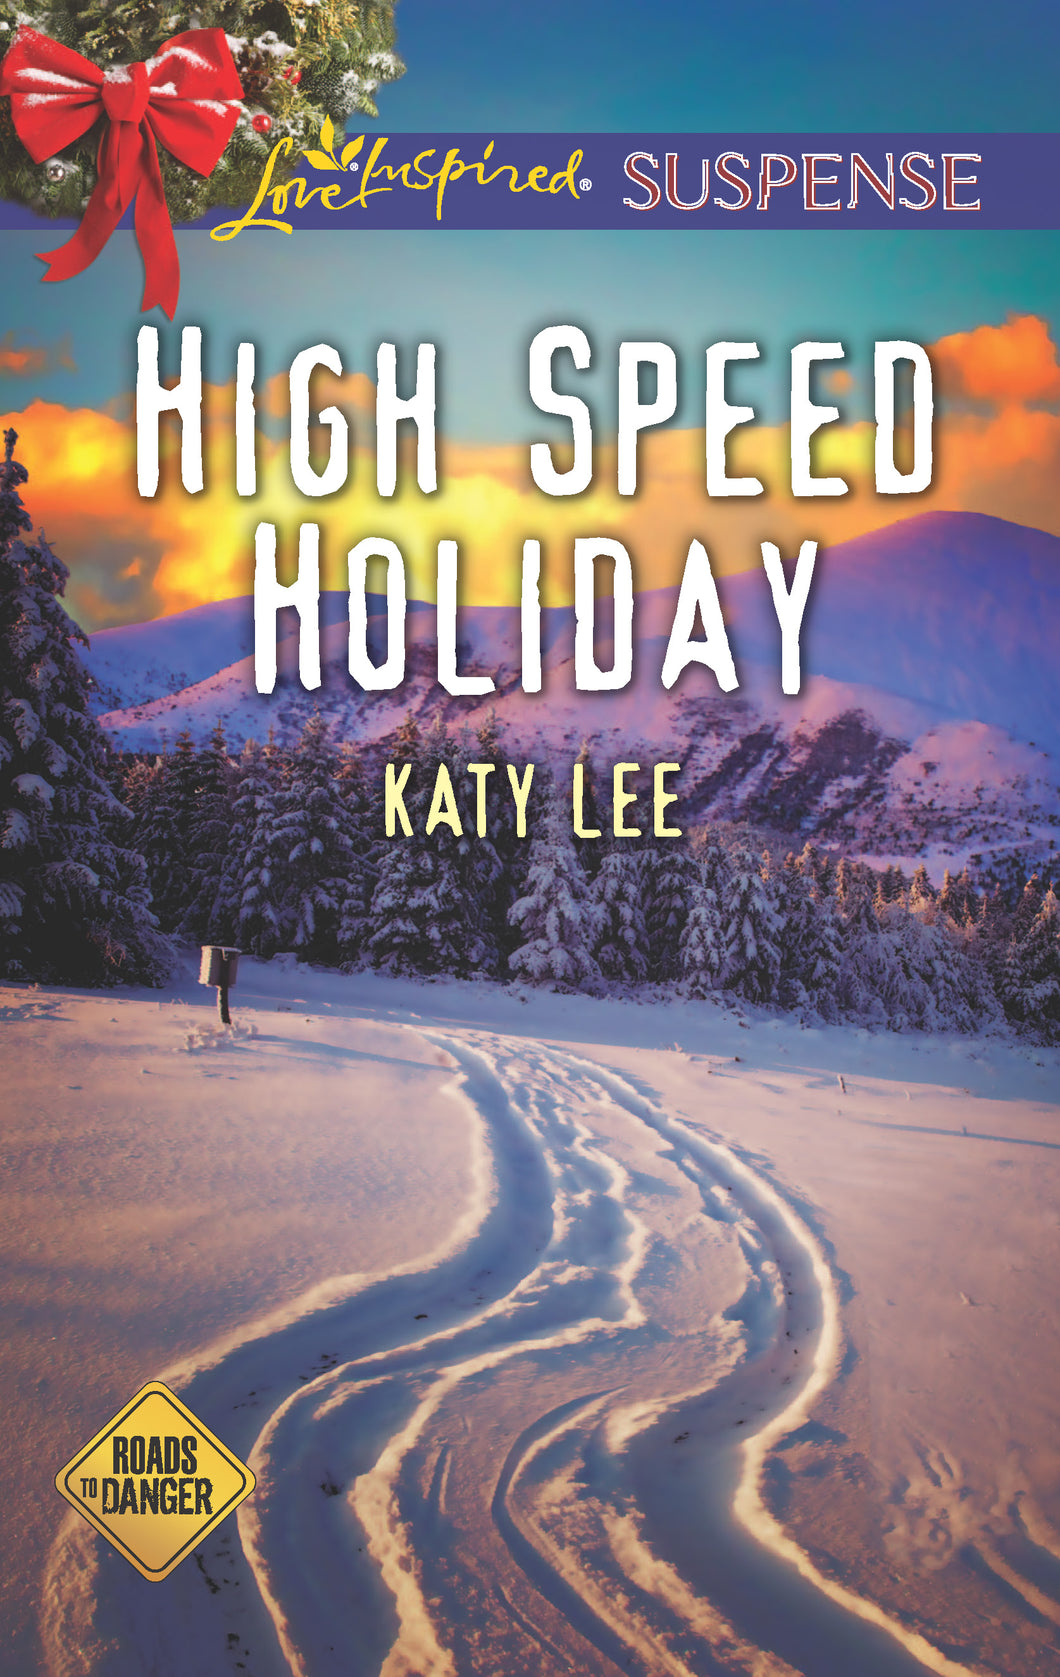 High Speed Holiday (Book 3 in the Roads to Danger) Author-signed Paperback